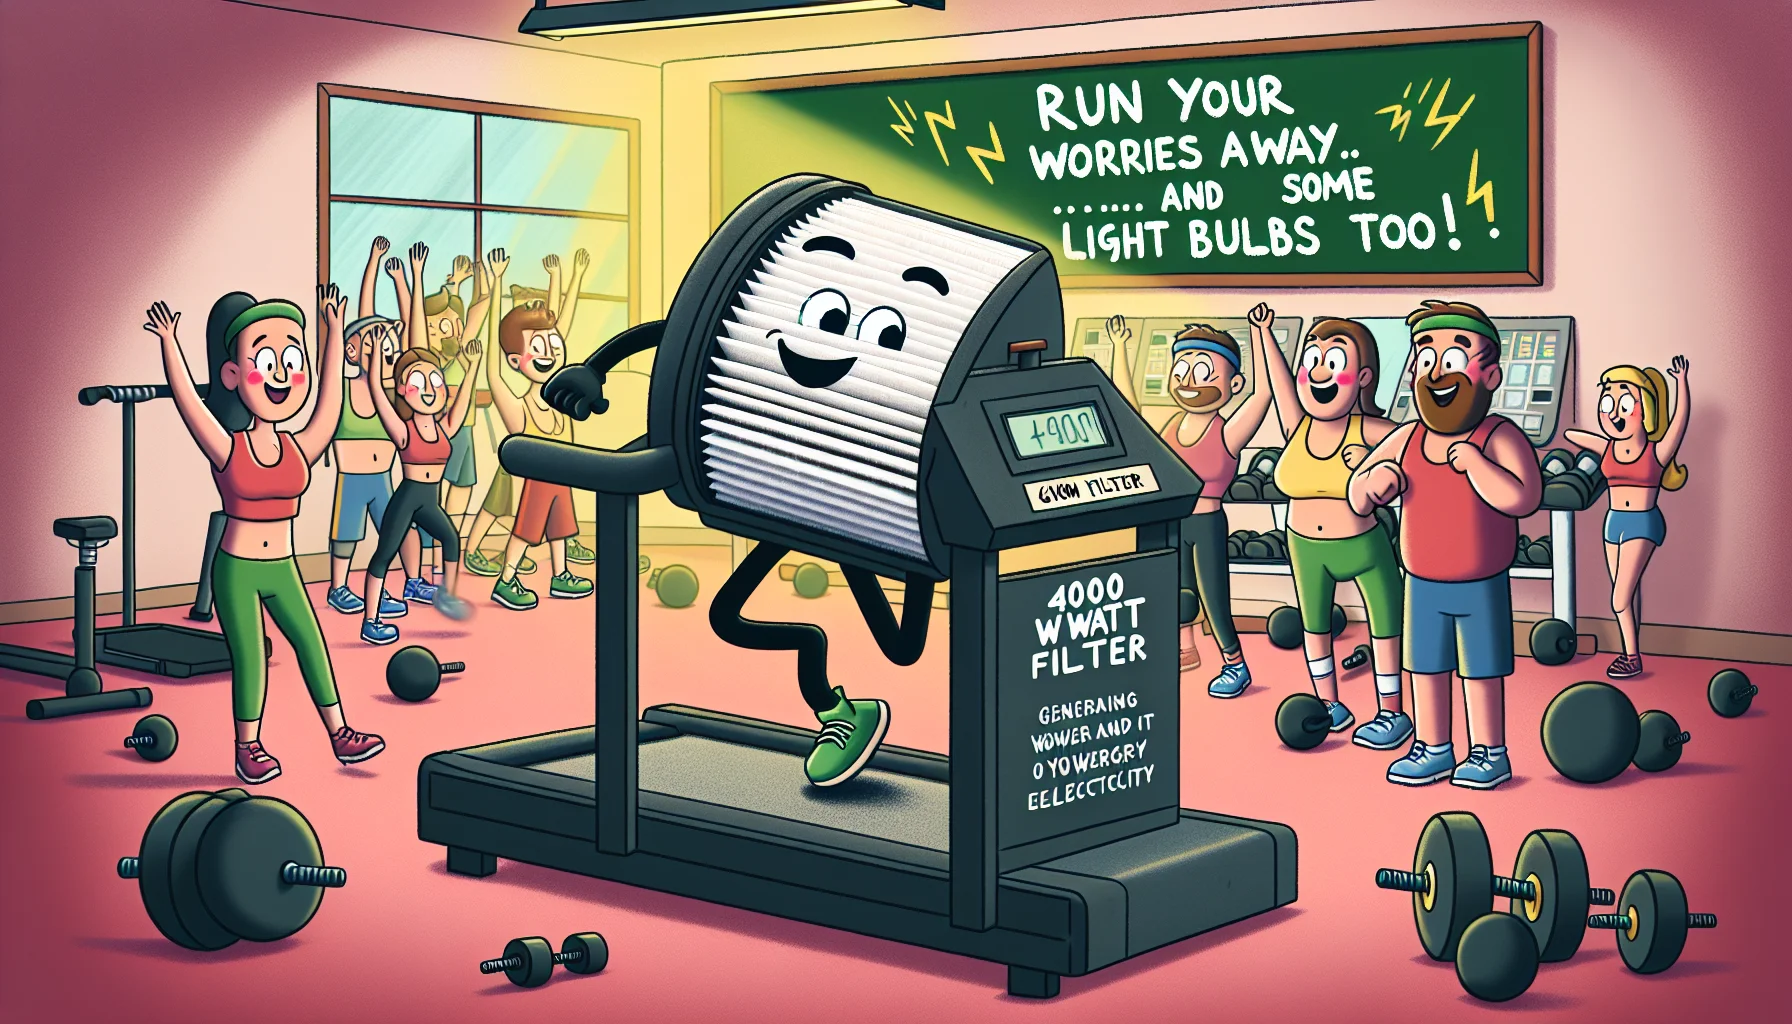 Create an image of a whimsical scenario centered around a 4000 Watt Filter. The filter might be personified, with cartoonish eyes and smile, doing a treadmill workout in a gym, generating electricity for other gym equipment. Enthusiastic gym-goers of diverse descents and genders admire the filter’s energy-producing capability. In the background, a chalkboard humorously promotes the idea with a slogan like, 'Run your worries away...and some light bulbs too!' The overall setup should inspire and entertain viewers, making them think about generating electricity in a fun and active way.